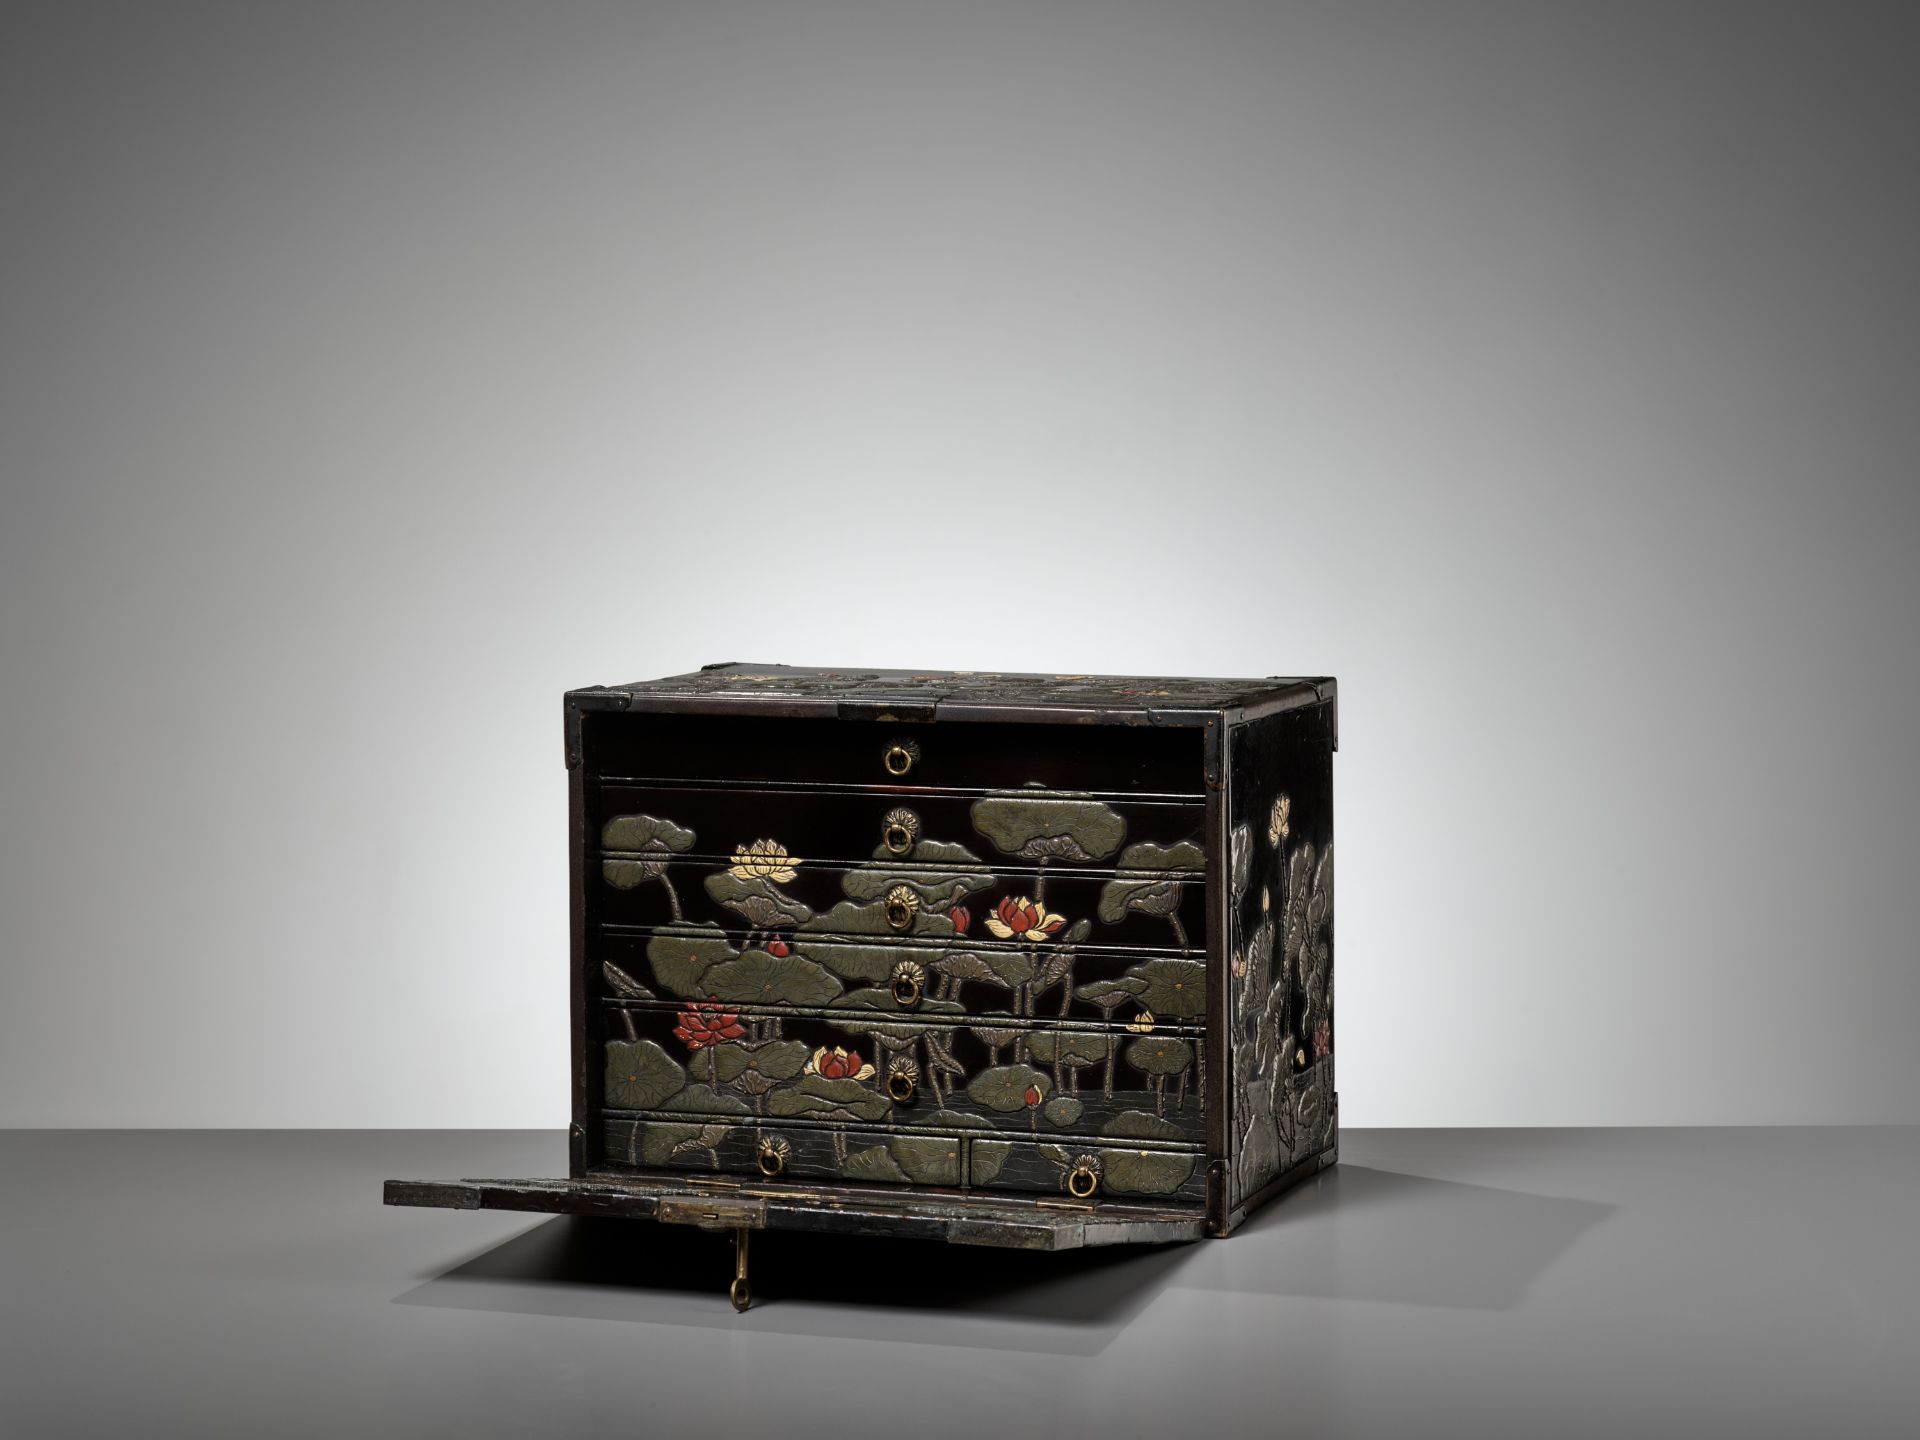 A RITSUO STYLE CERAMIC-INLAID AND LACQUERED WOOD KODANSU (CABINET) WITH A LOTUS POND AND EGRETS - Image 4 of 14